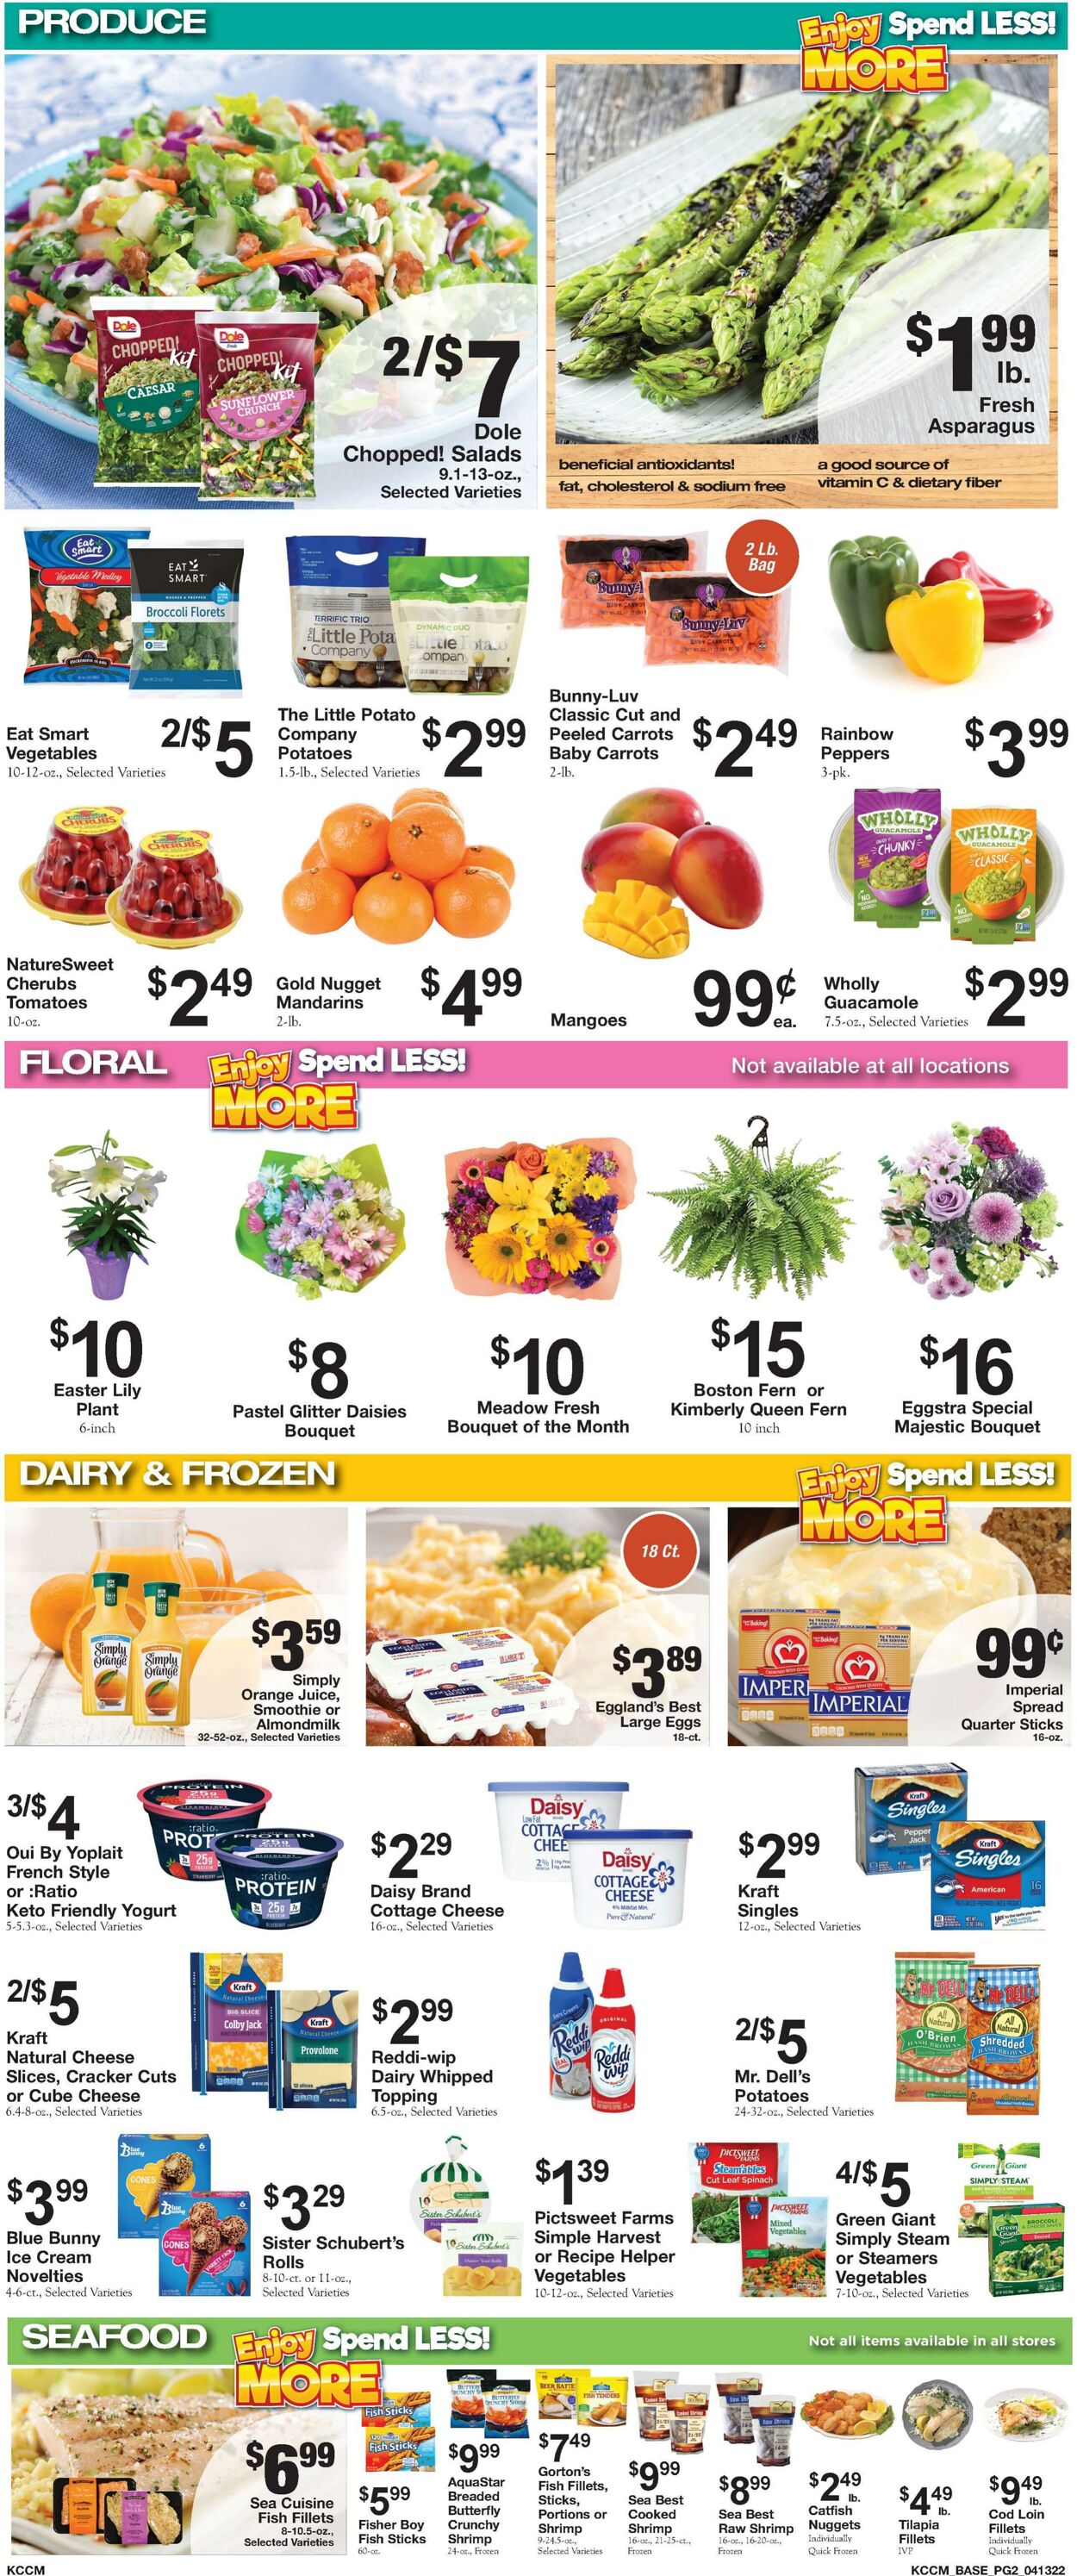 Weekly ad Country Mart 04/12/2022 - 04/18/2022